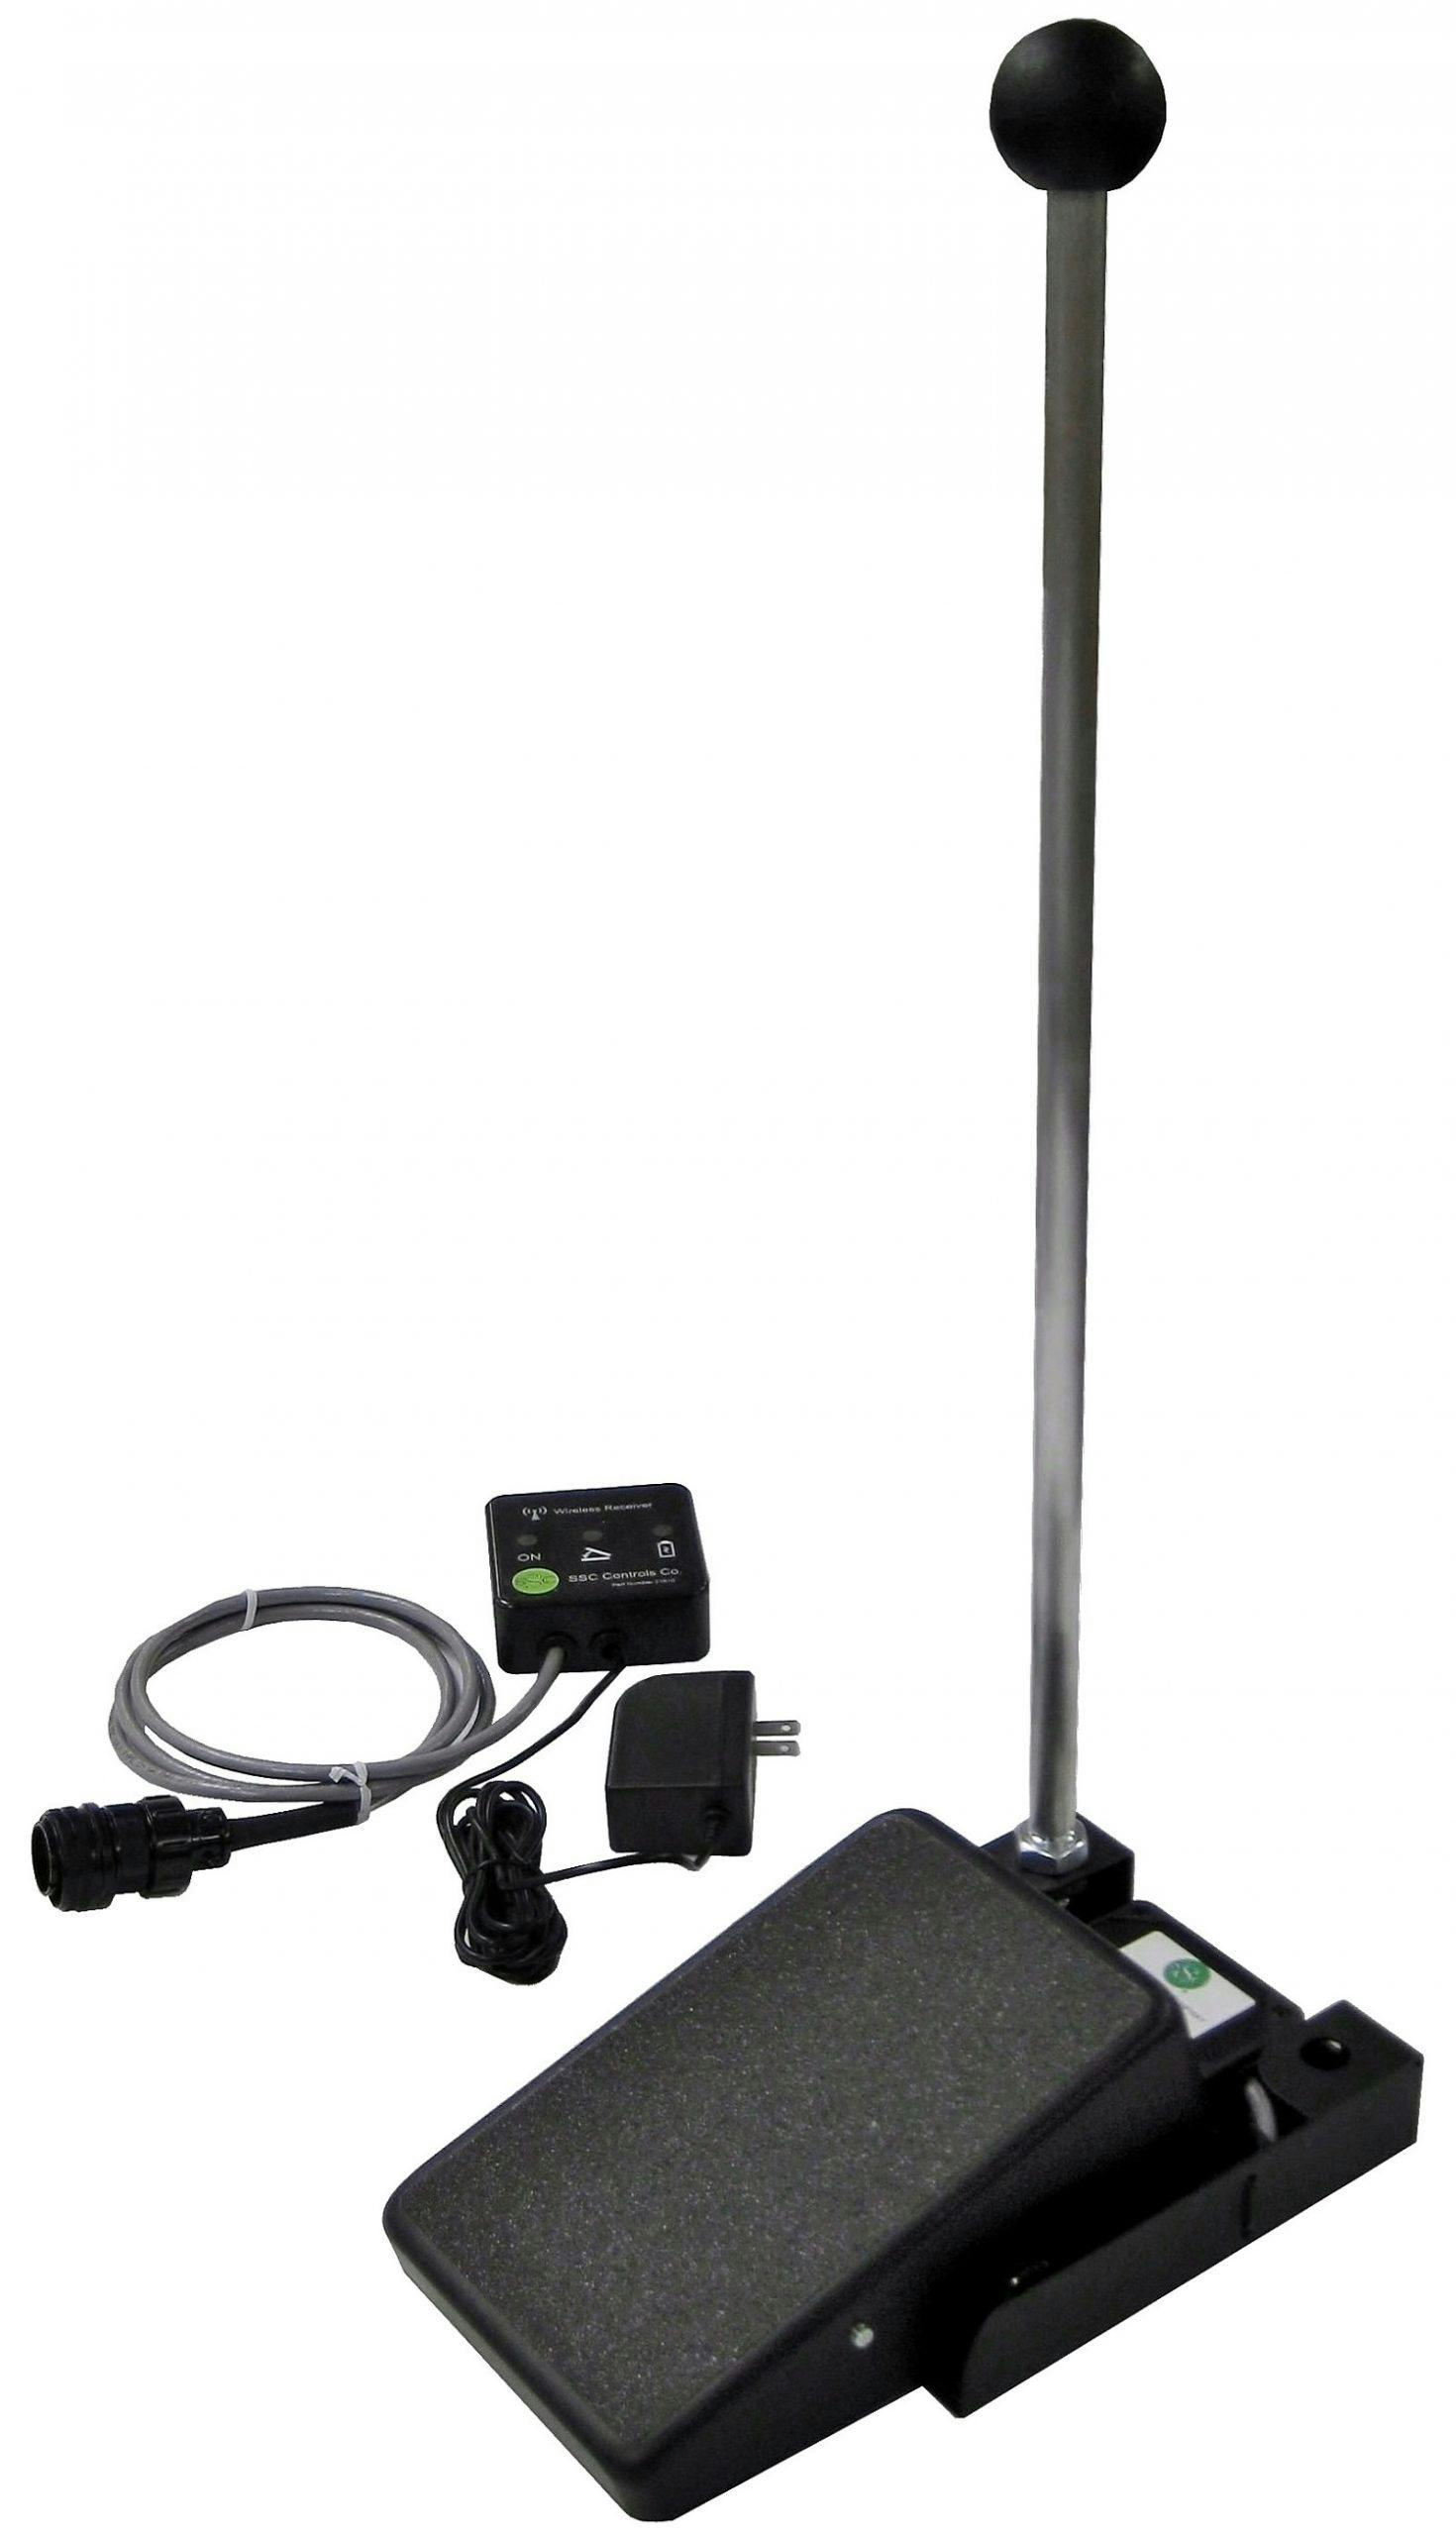 SSC Controls RFT1 Wirless Remote TIG Welding Foot Control Pedal